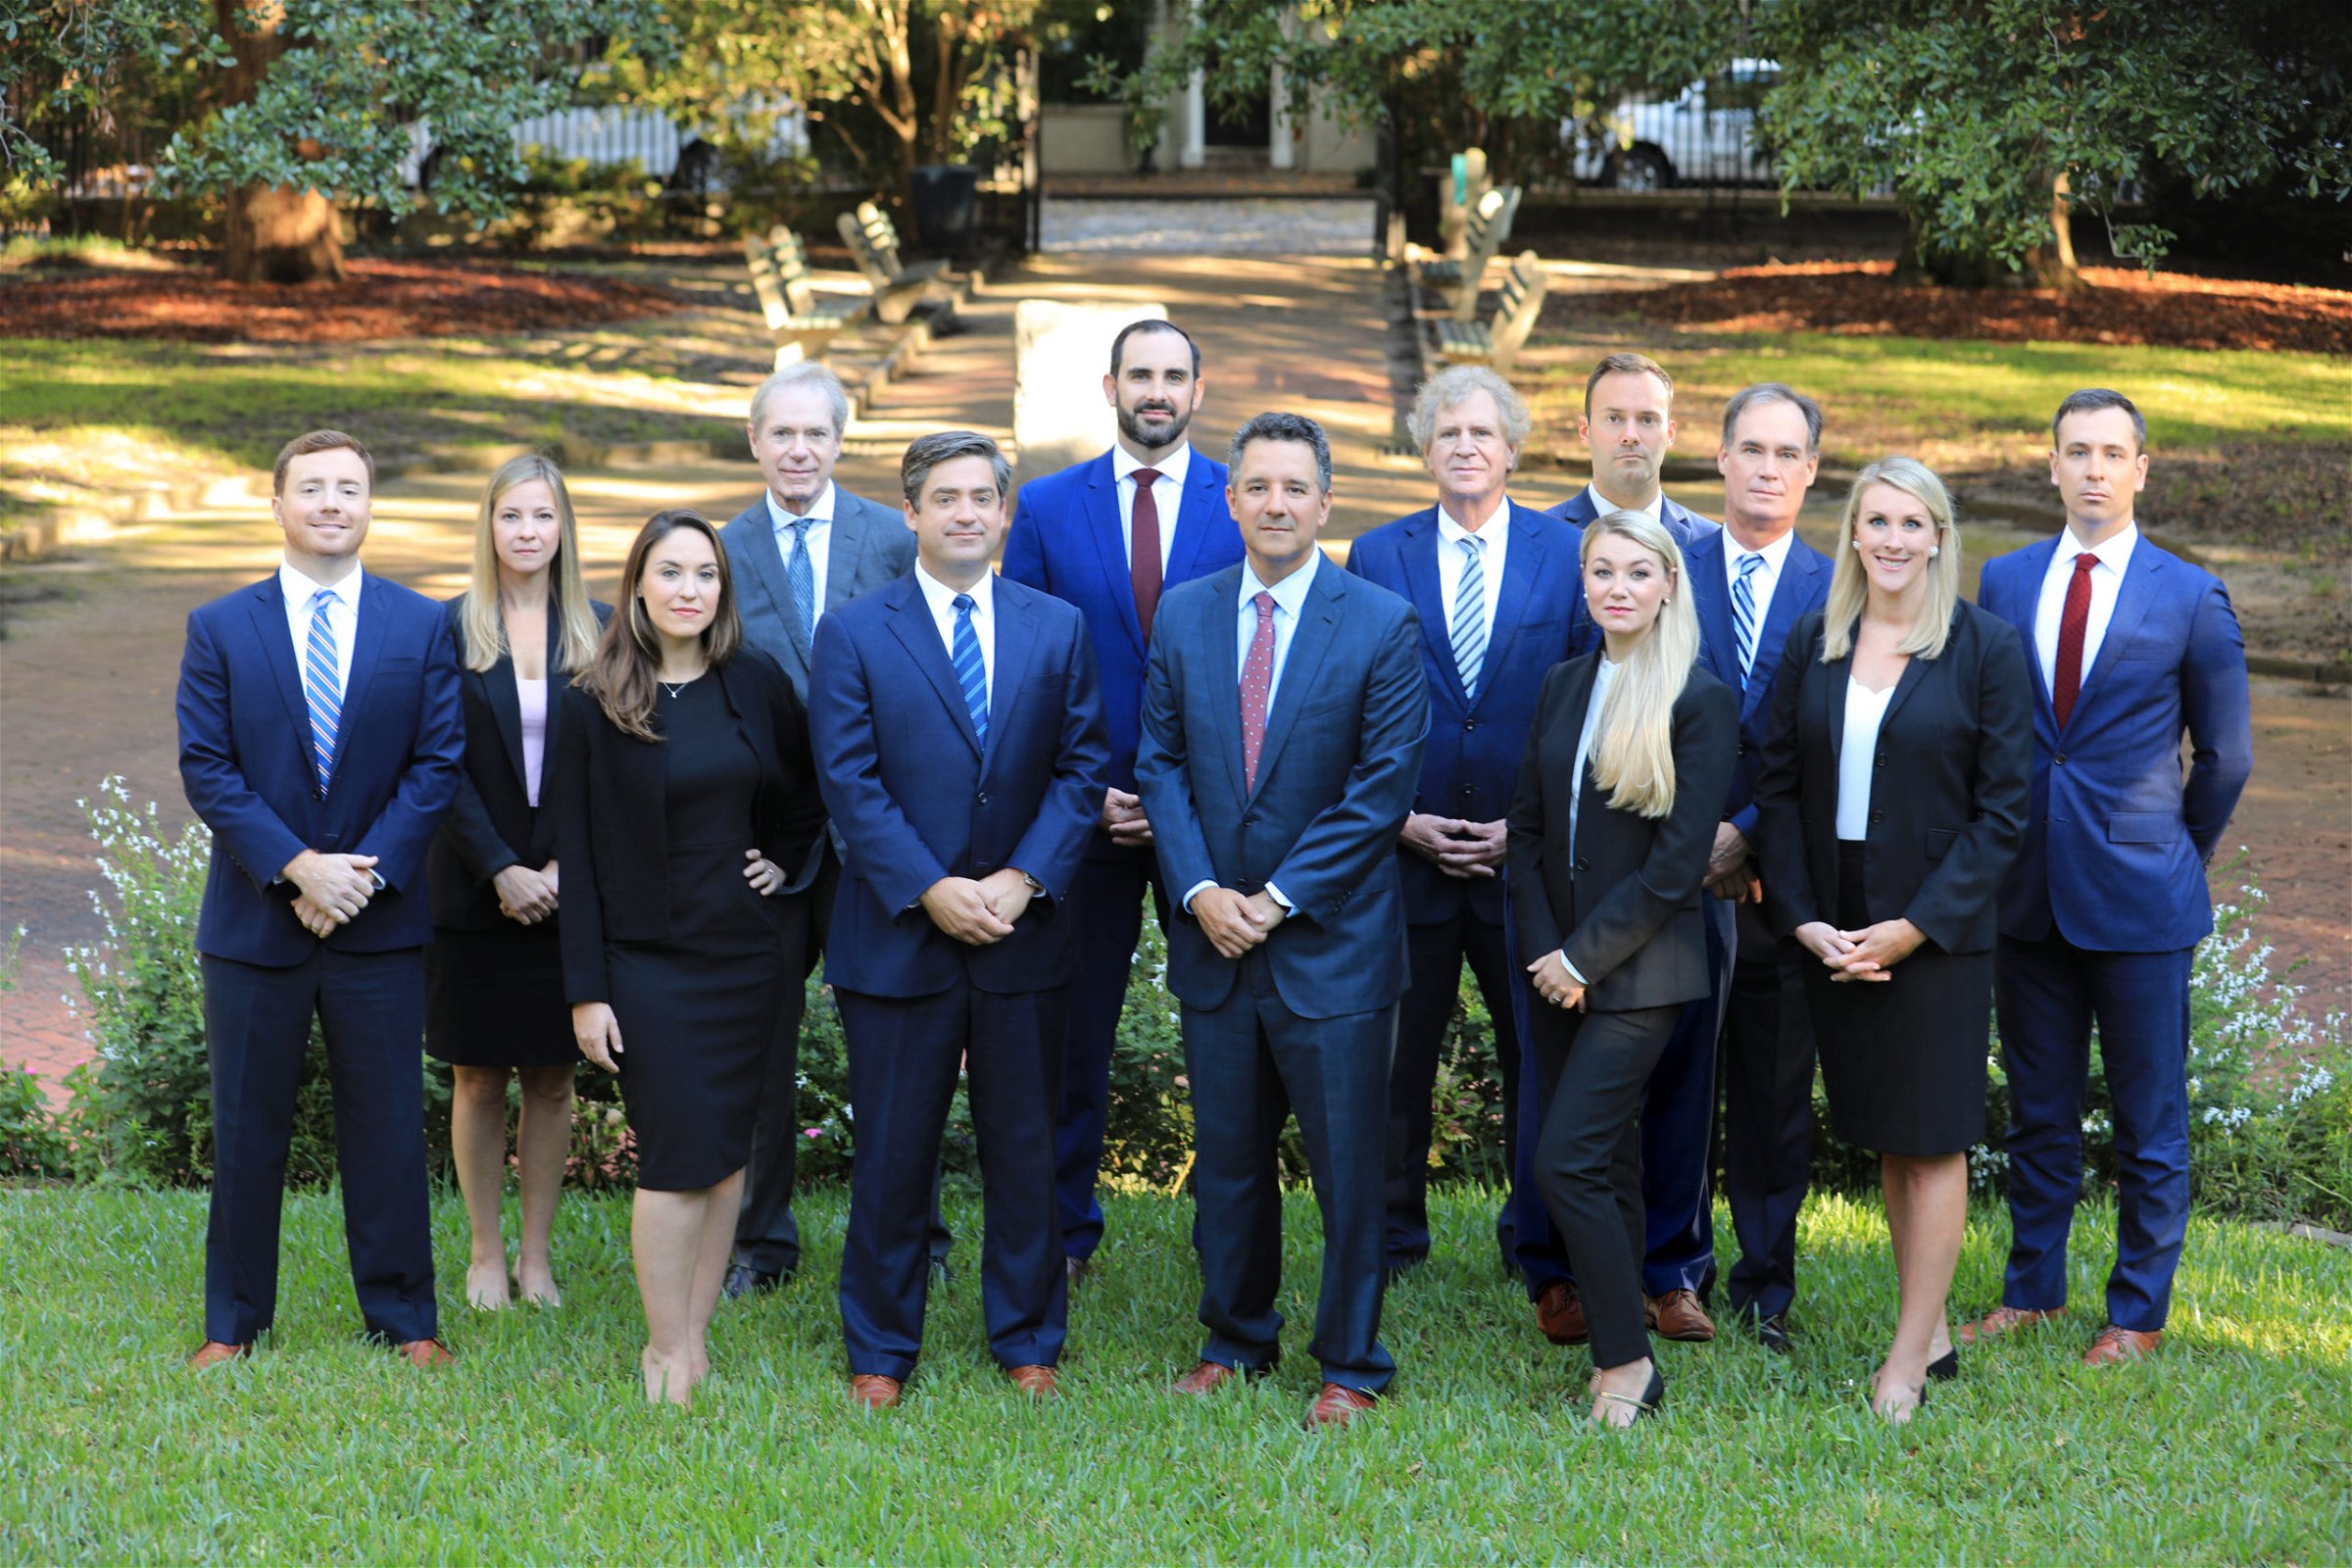 South Carolina Personal Injury Lawyers from the Steinberg Law Firm